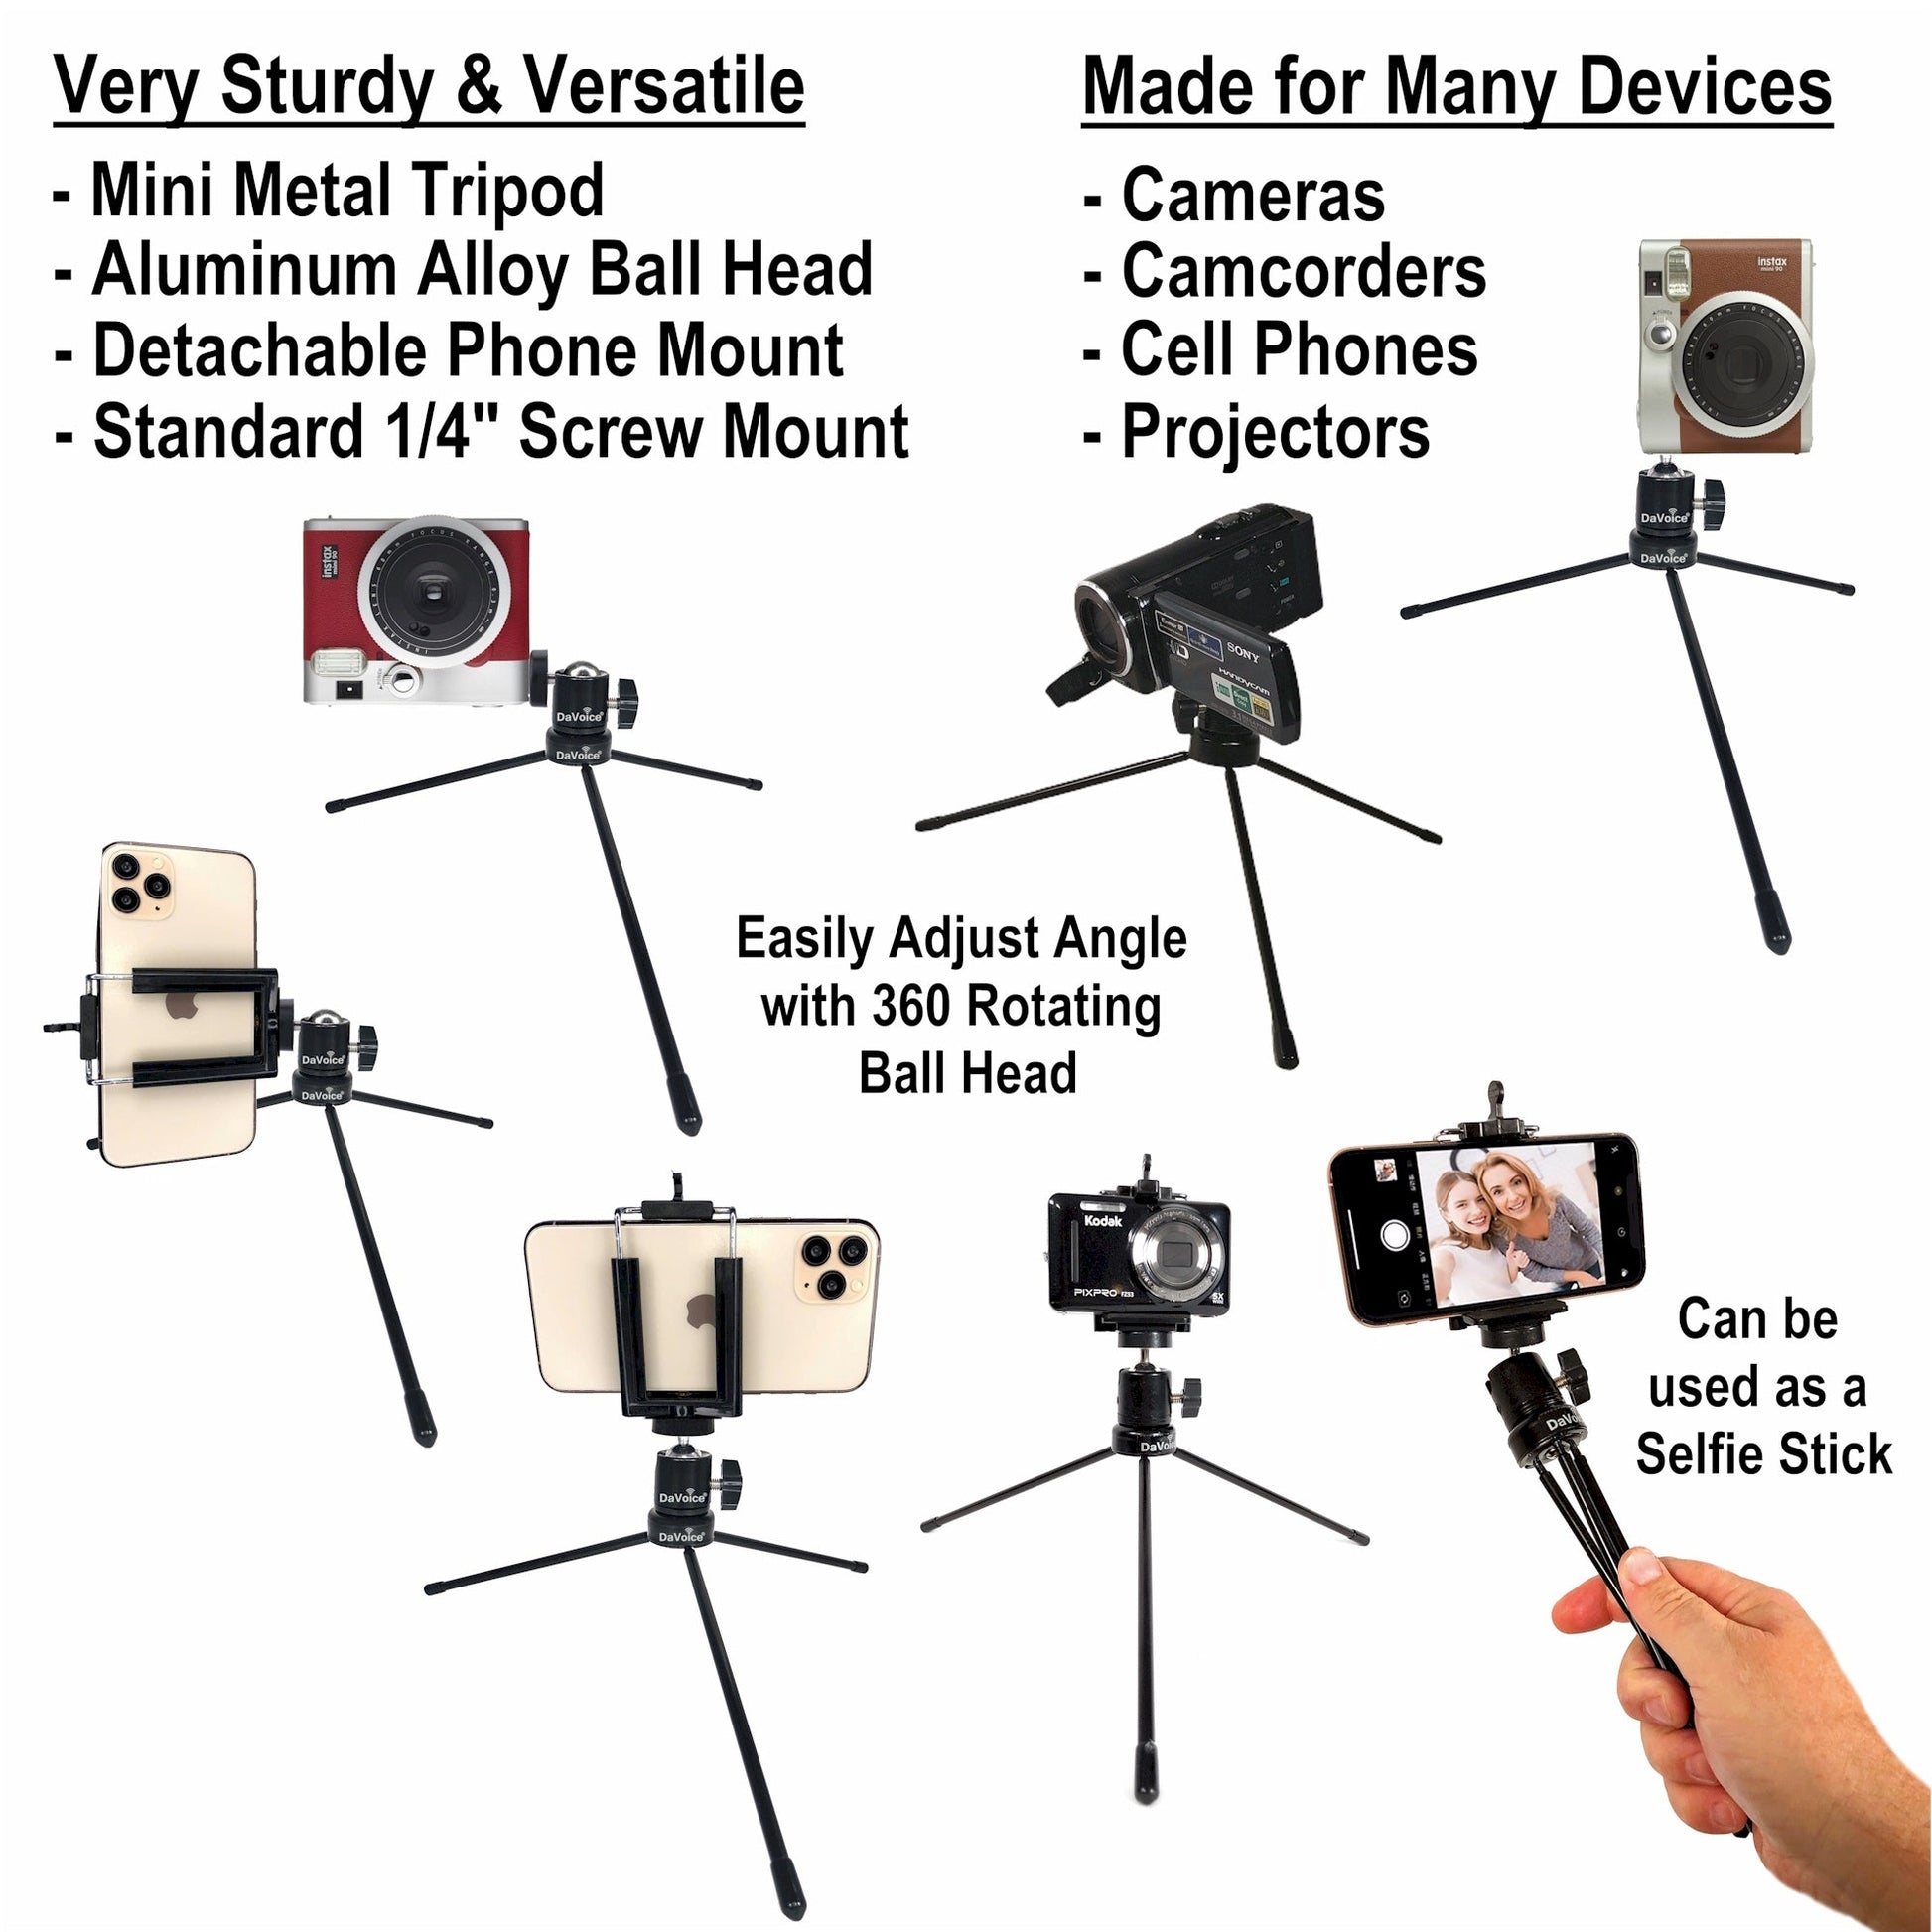 How To Set Up Iphone Tripod ?